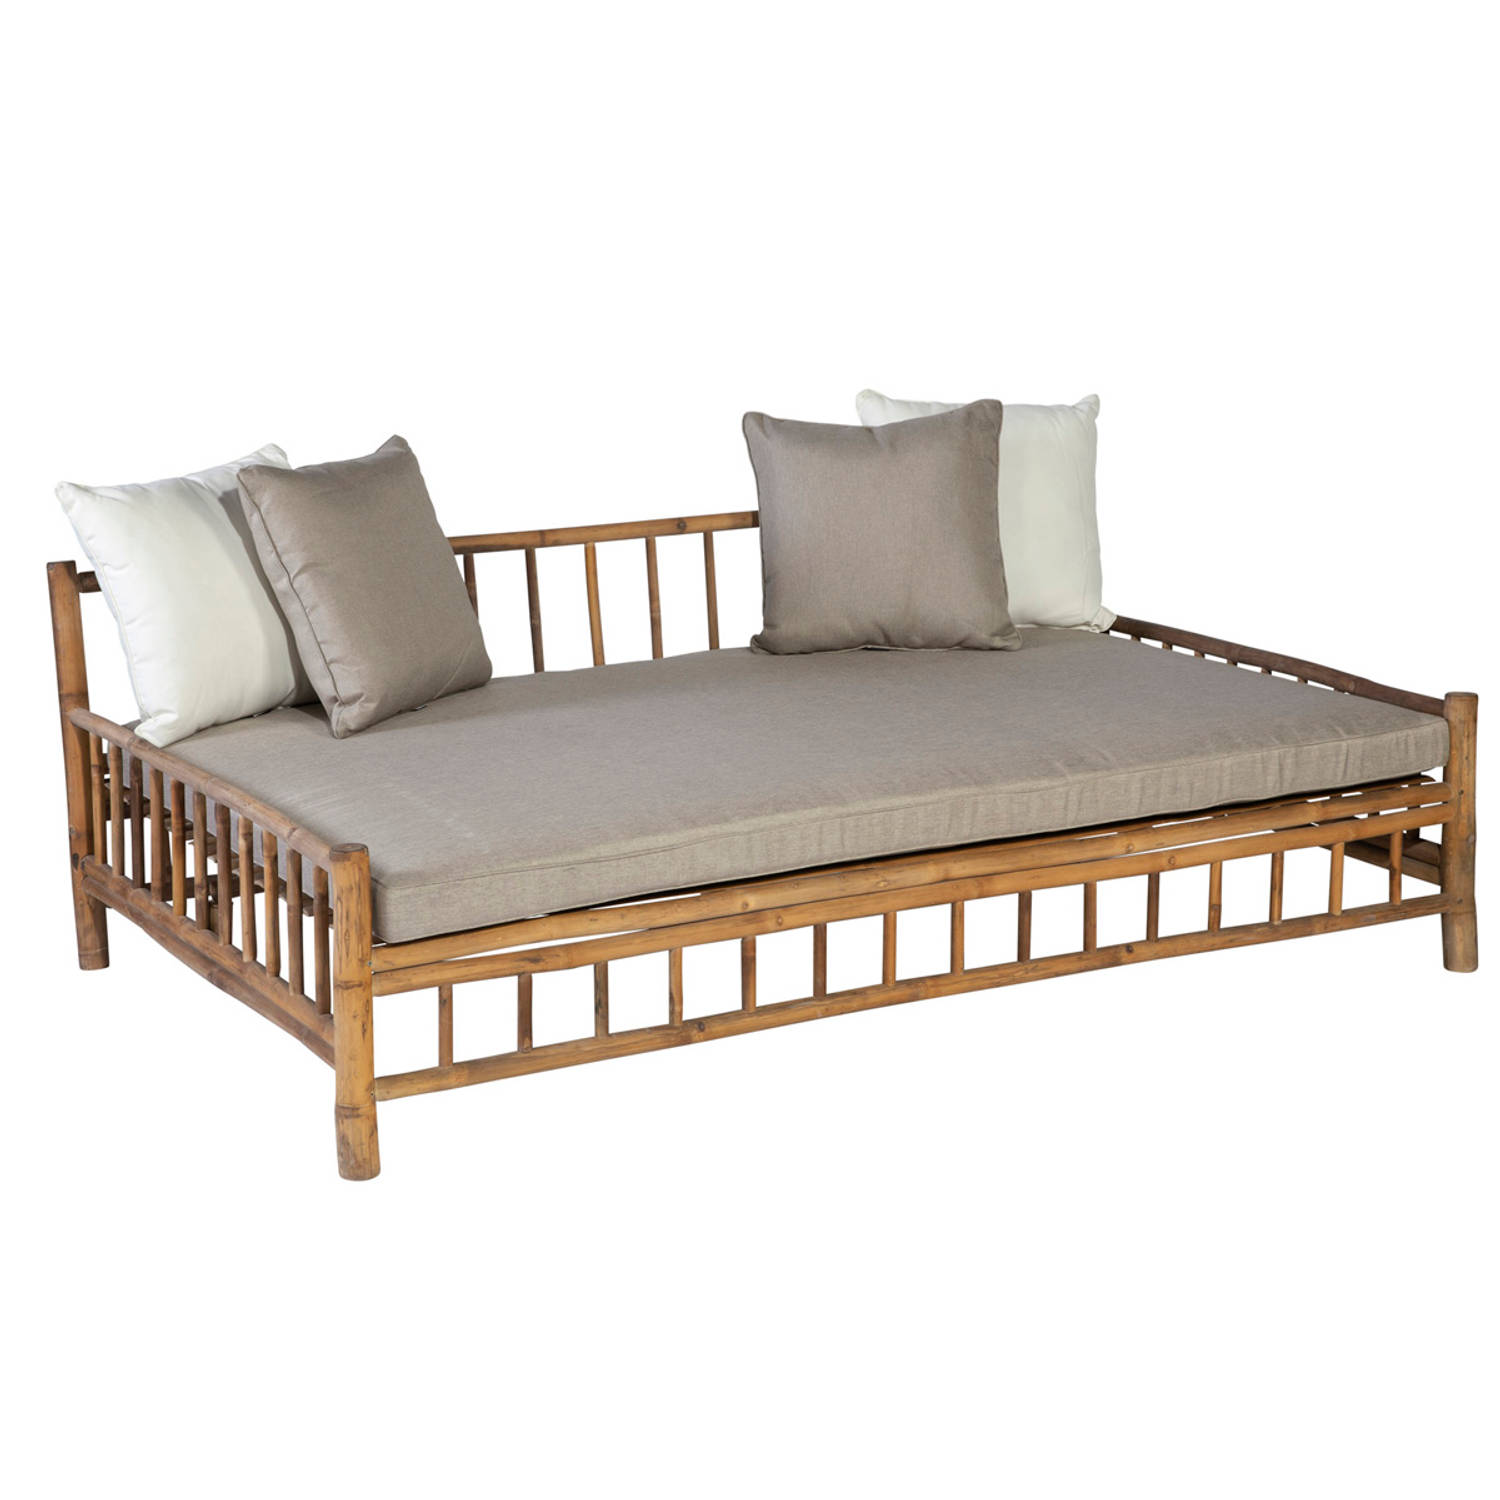 Persoon Exotan Bamboe Lounge Tuin Ligbed Daybed Bamboo Natural Finish